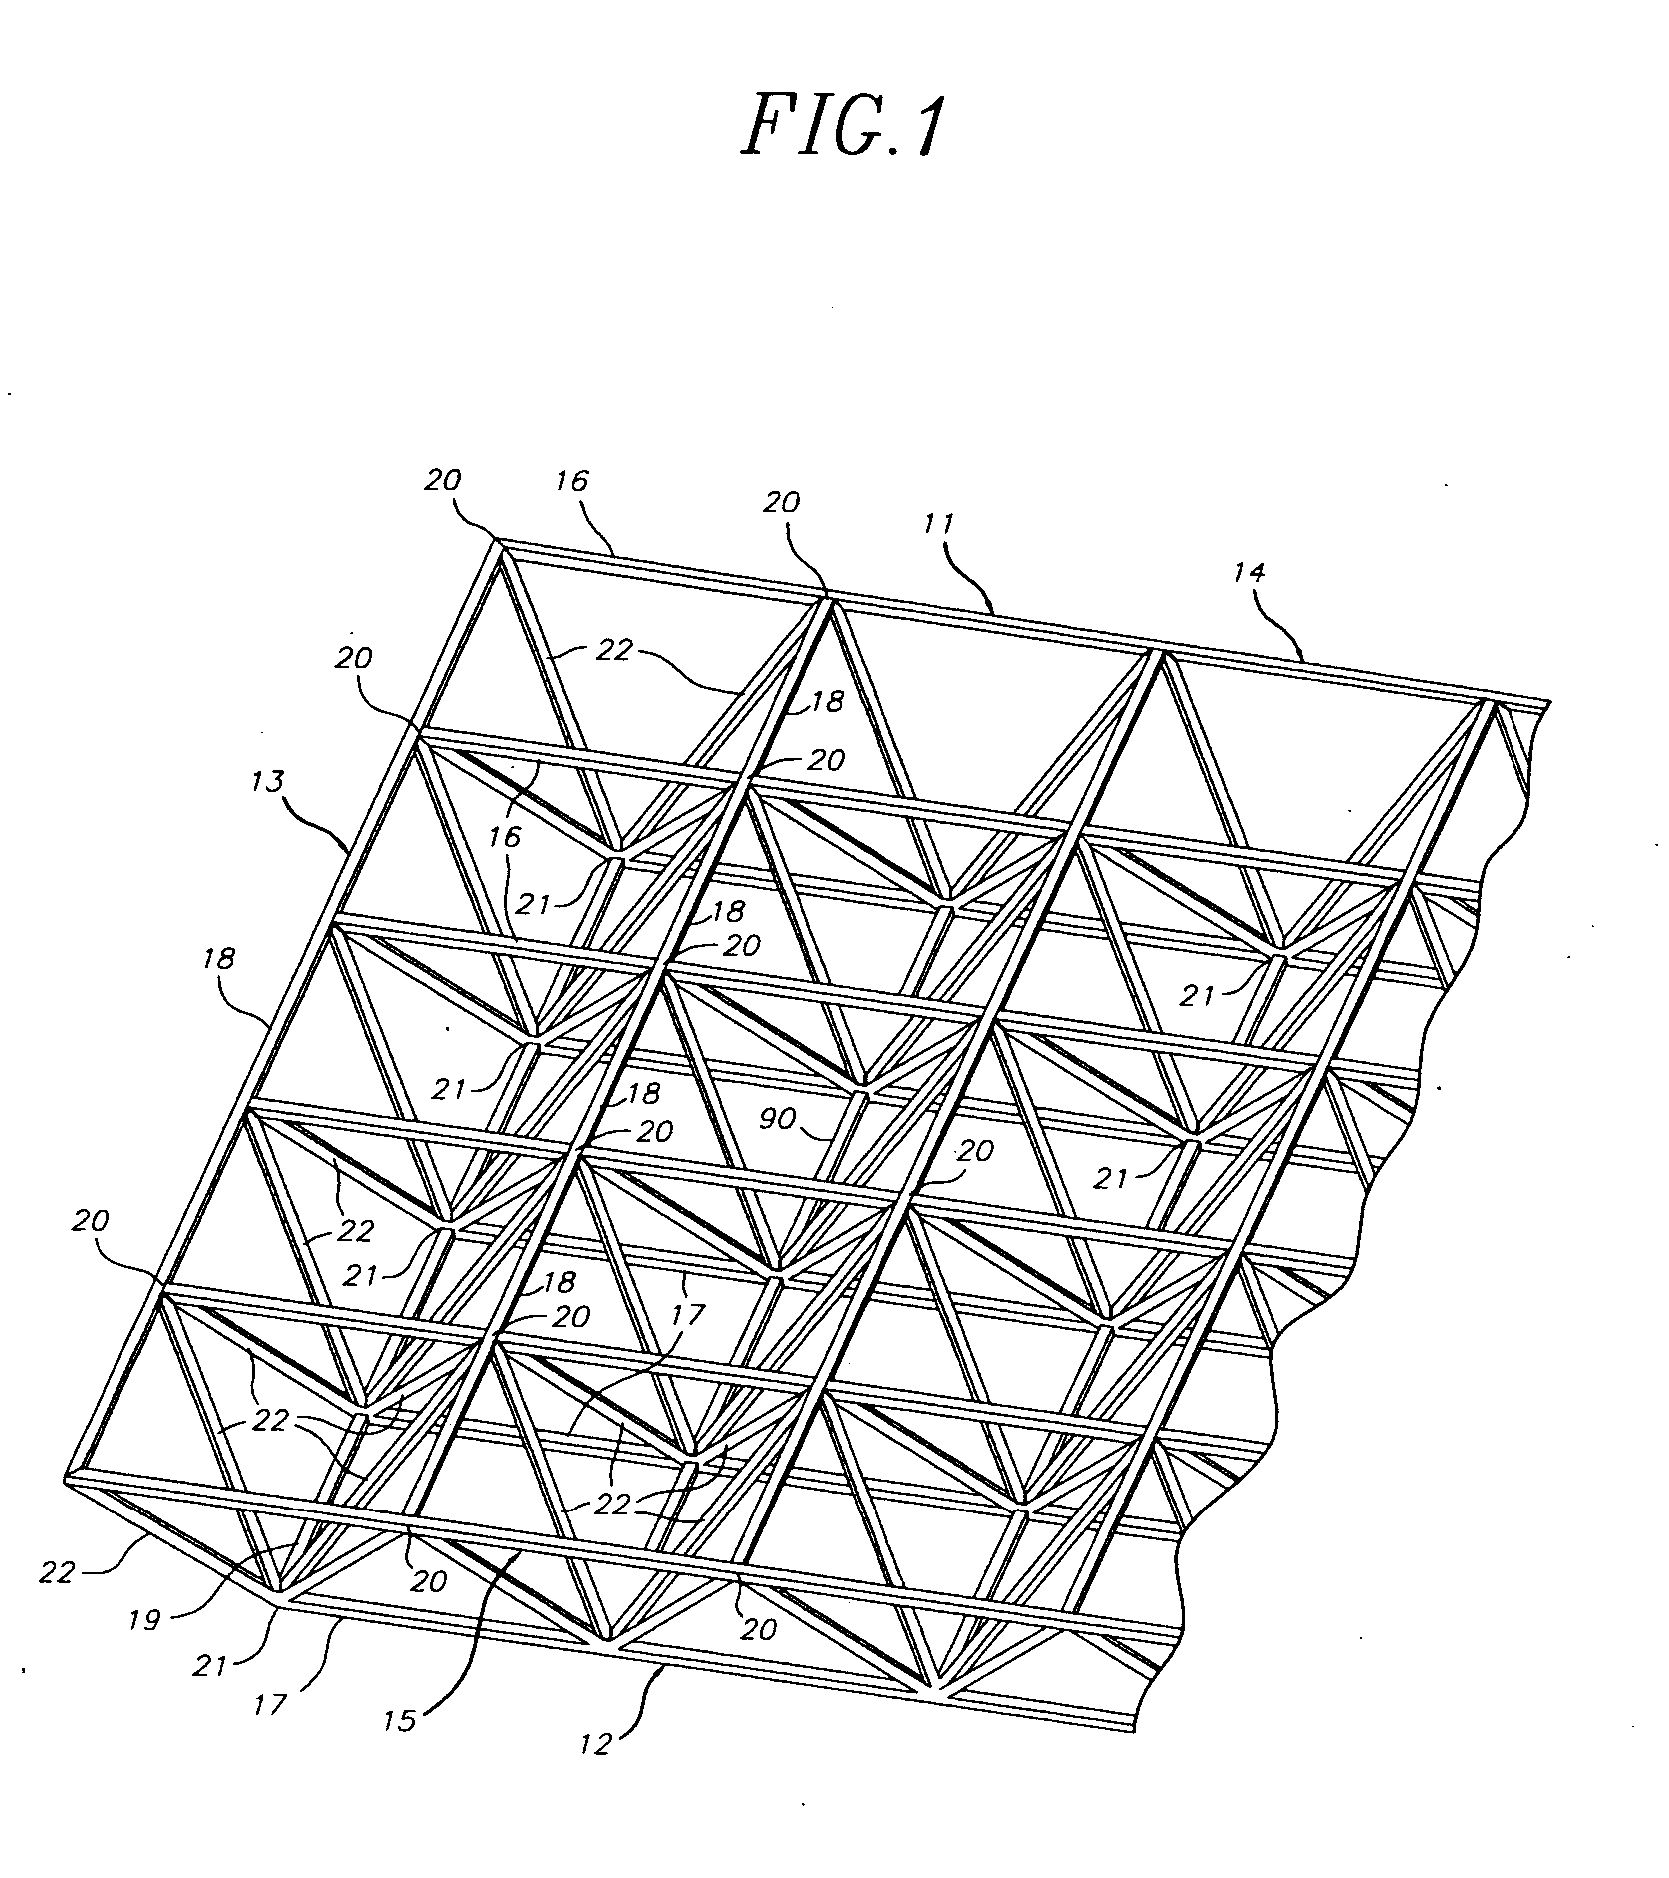 Space frames and connection node arrangement for them